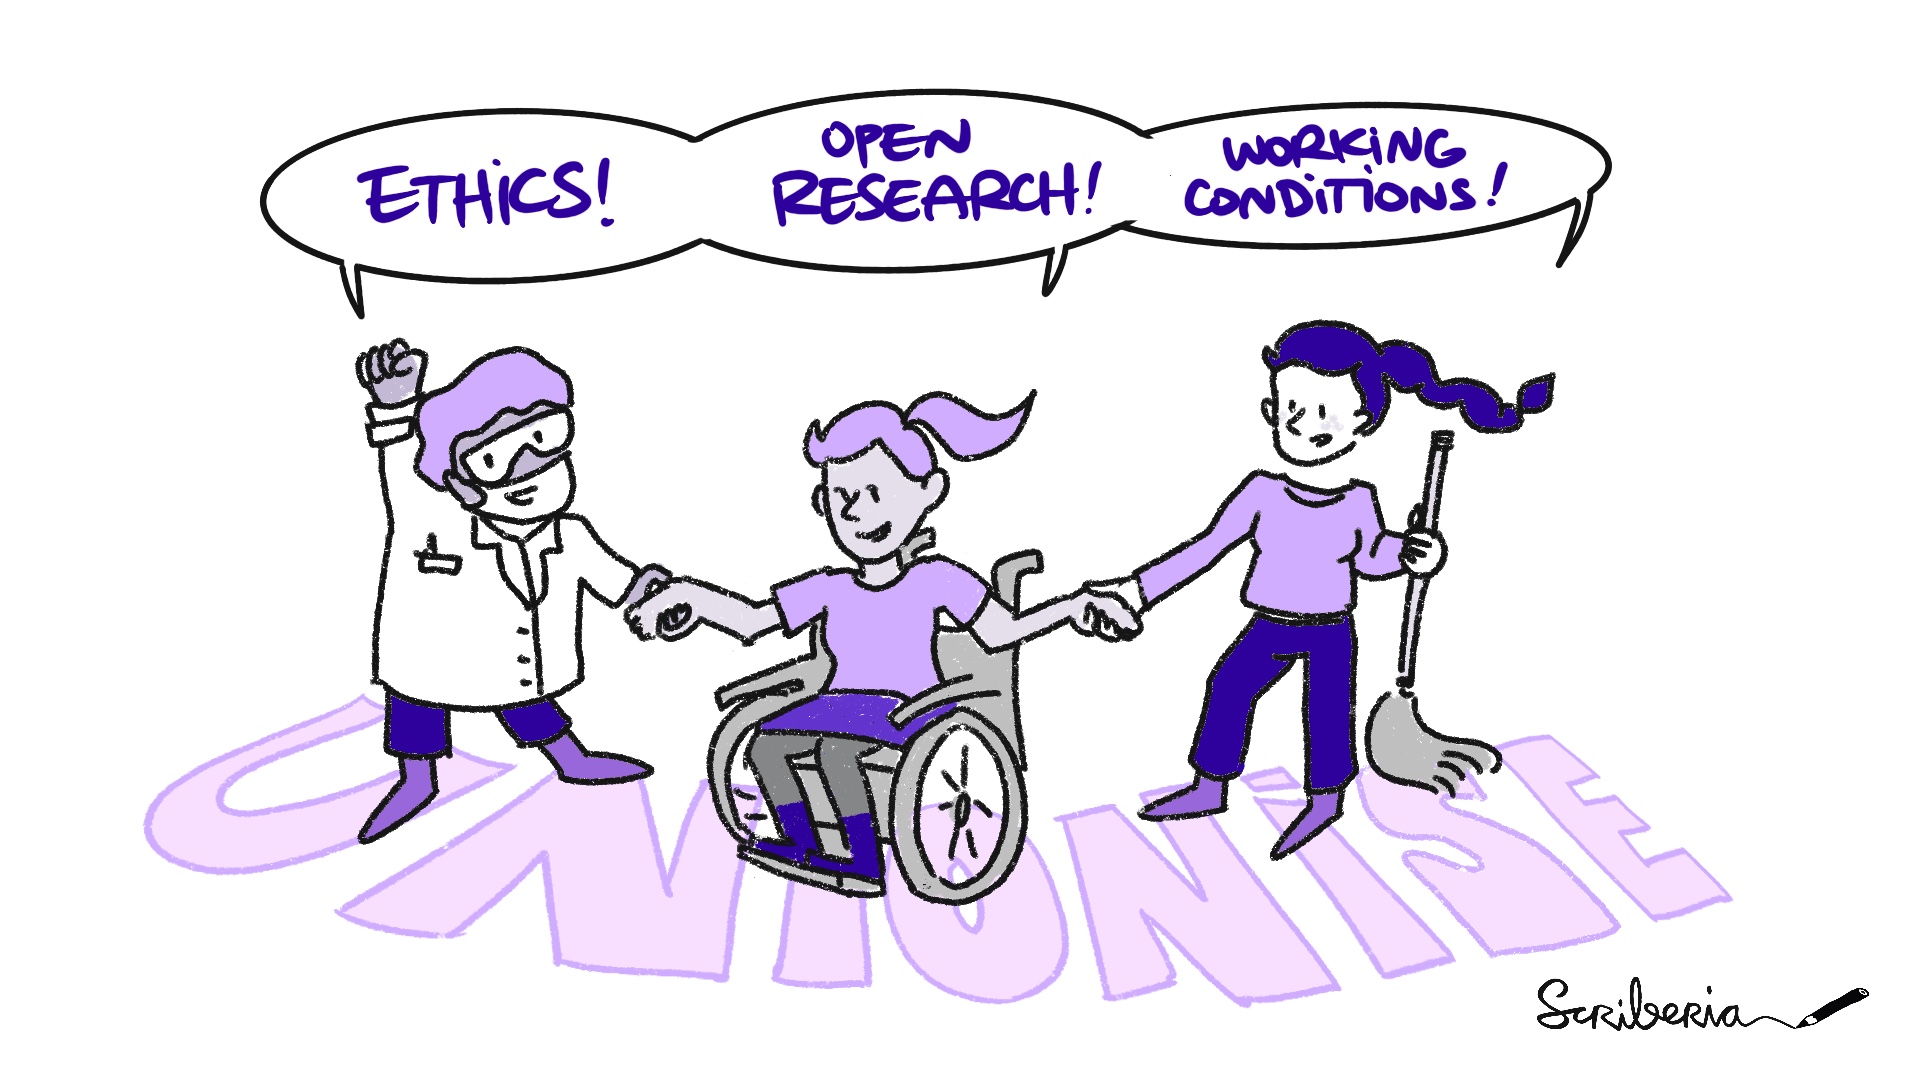 A black, white, grey, blue and purple cartoon of three people, one wearing a lab coat and goggles, one in a wheelchair, and one holding a mop, standing hand-in-hand over the purple text 'UNIONISE'. They have speech bubbles above them which say 'Ethics!', 'Open Research!' and 'Working Conditions!'